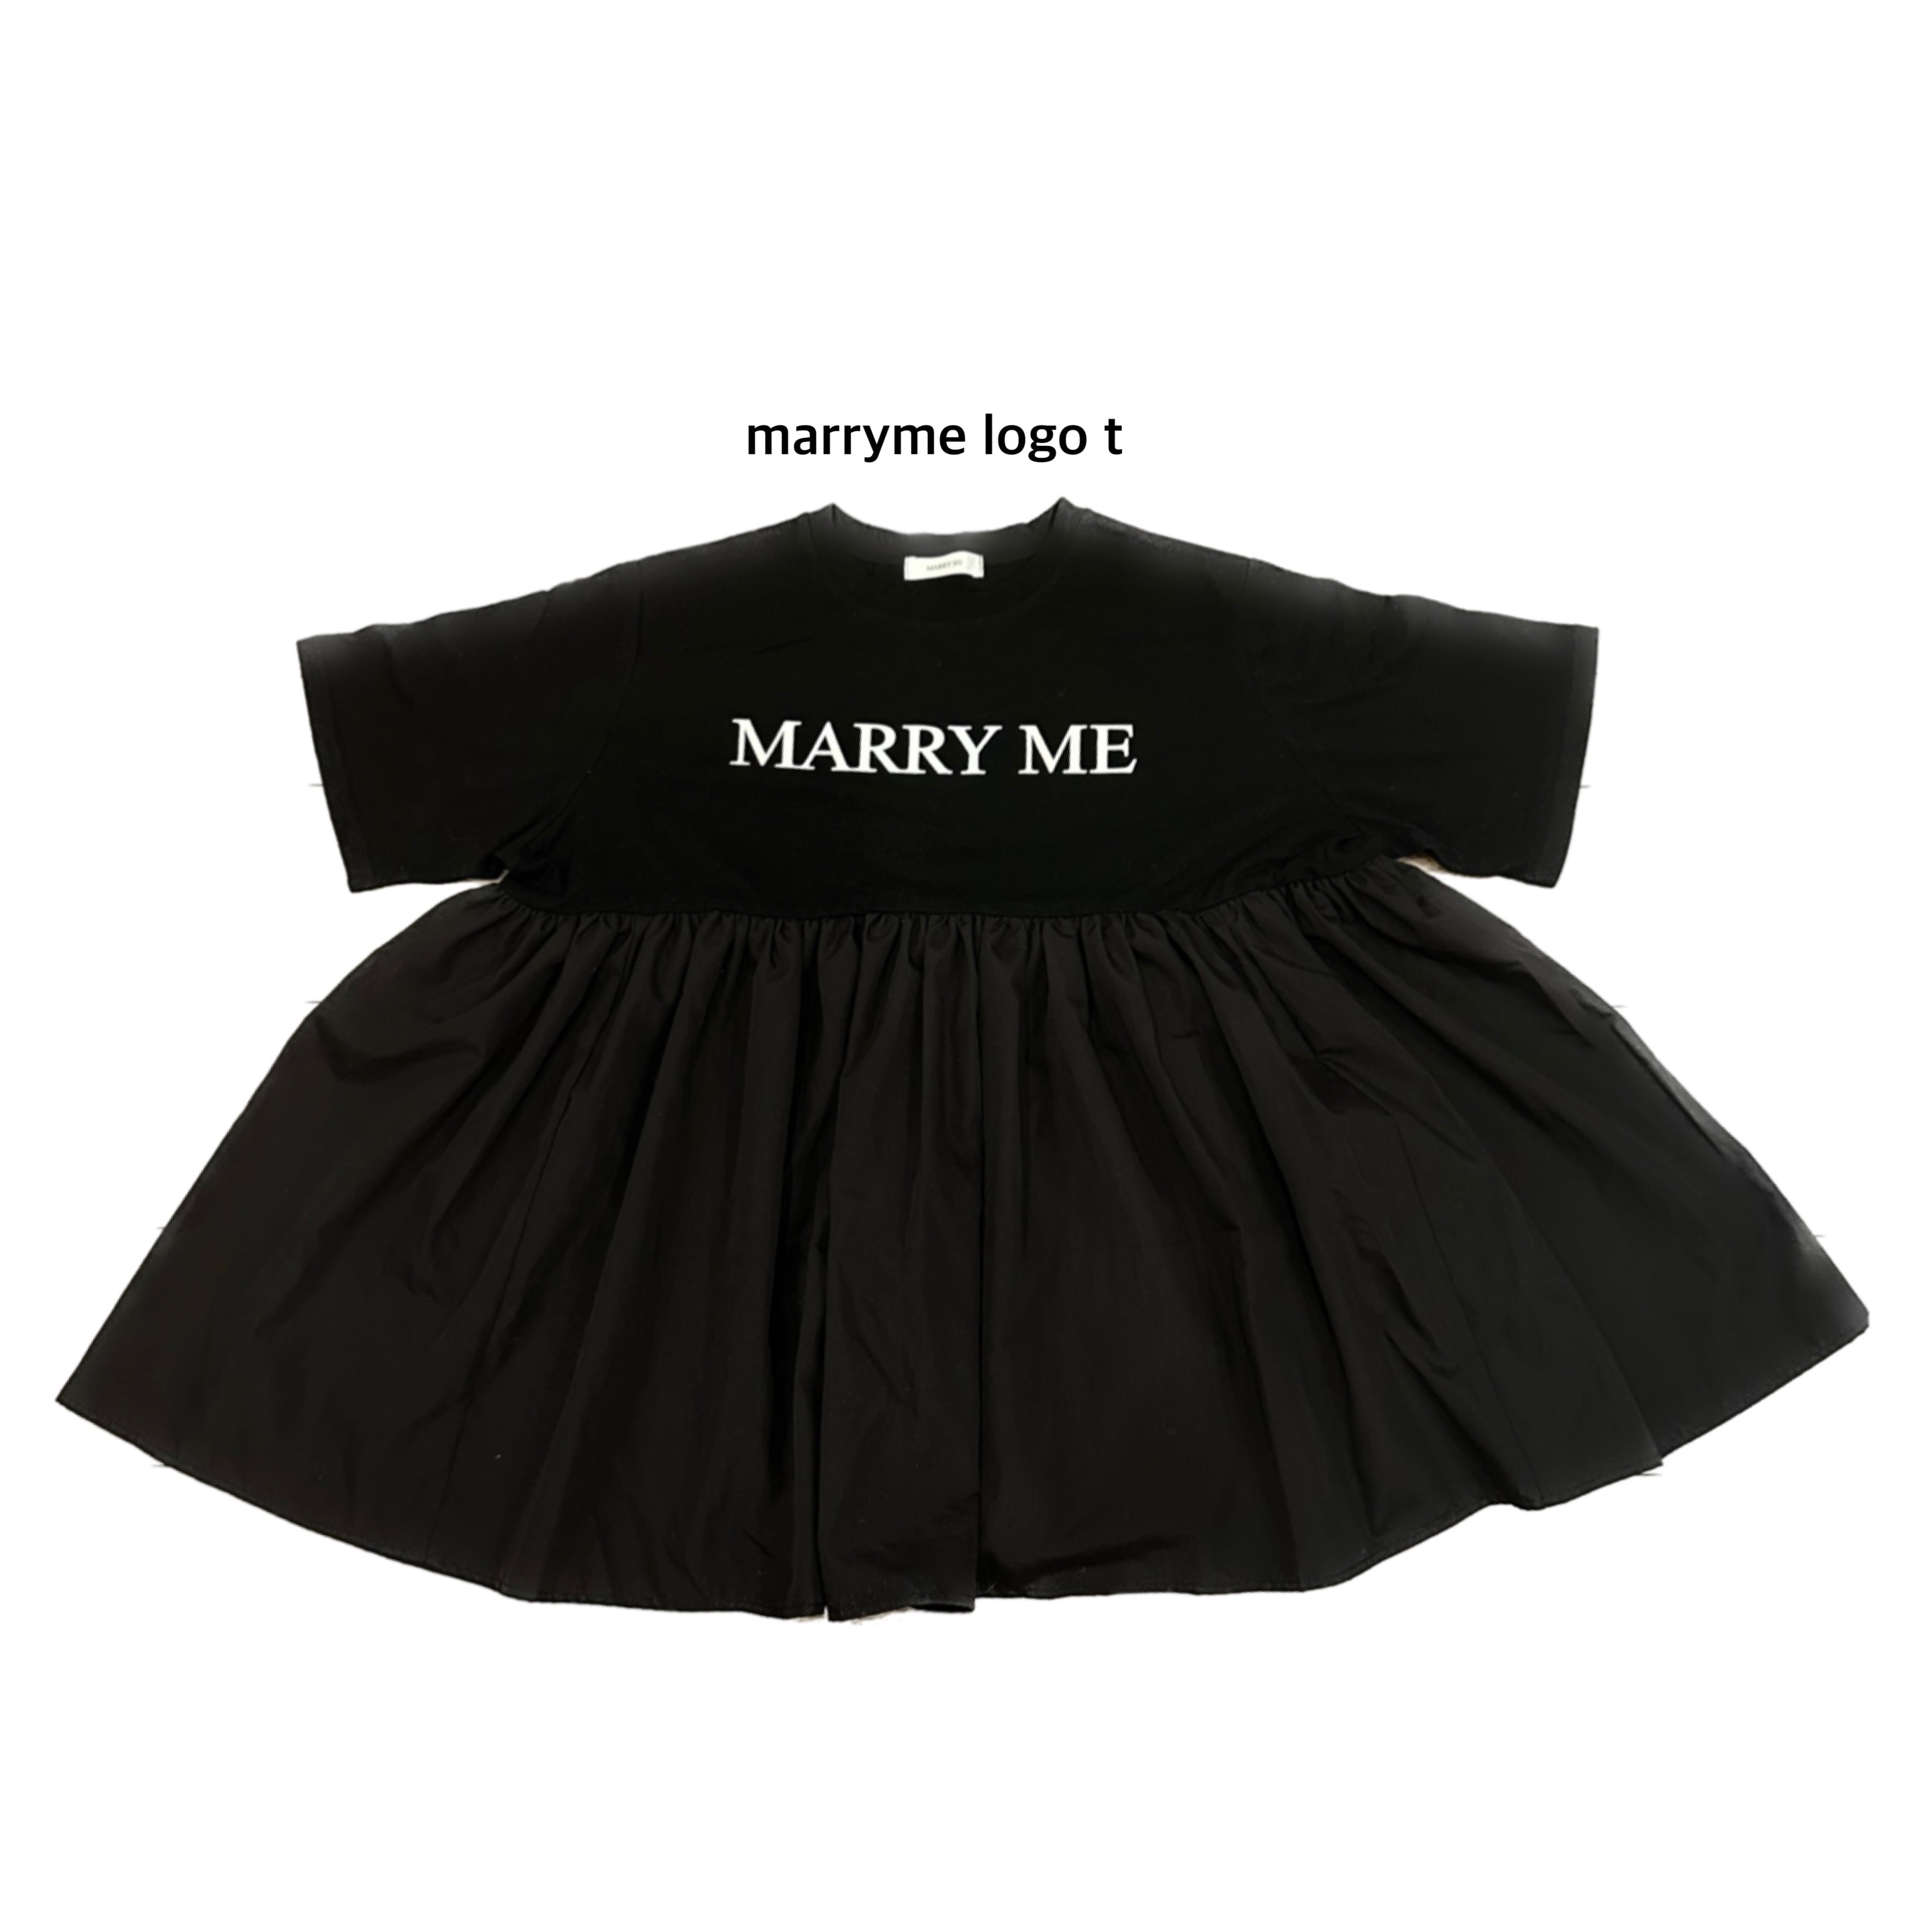 MARRYME LOGO T | MARRY ME.Official